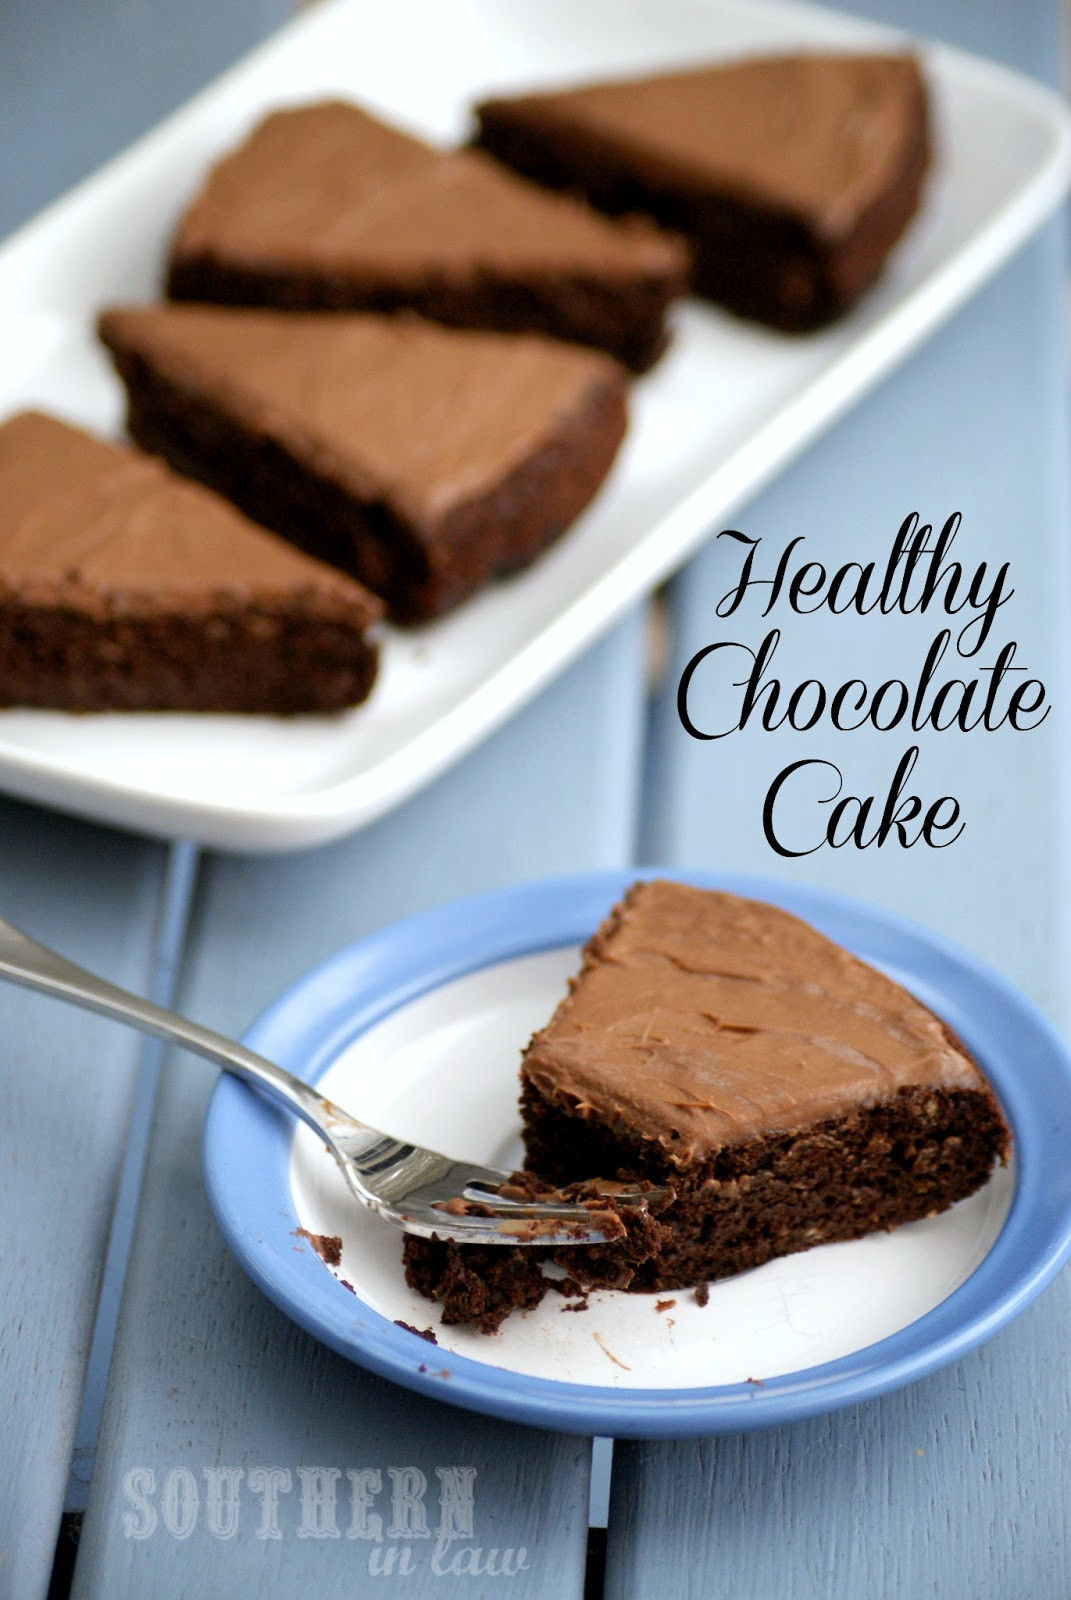 Low Calorie Gluten Free Desserts
 Southern In Law Recipe Healthy Chocolate Cake Vegan too